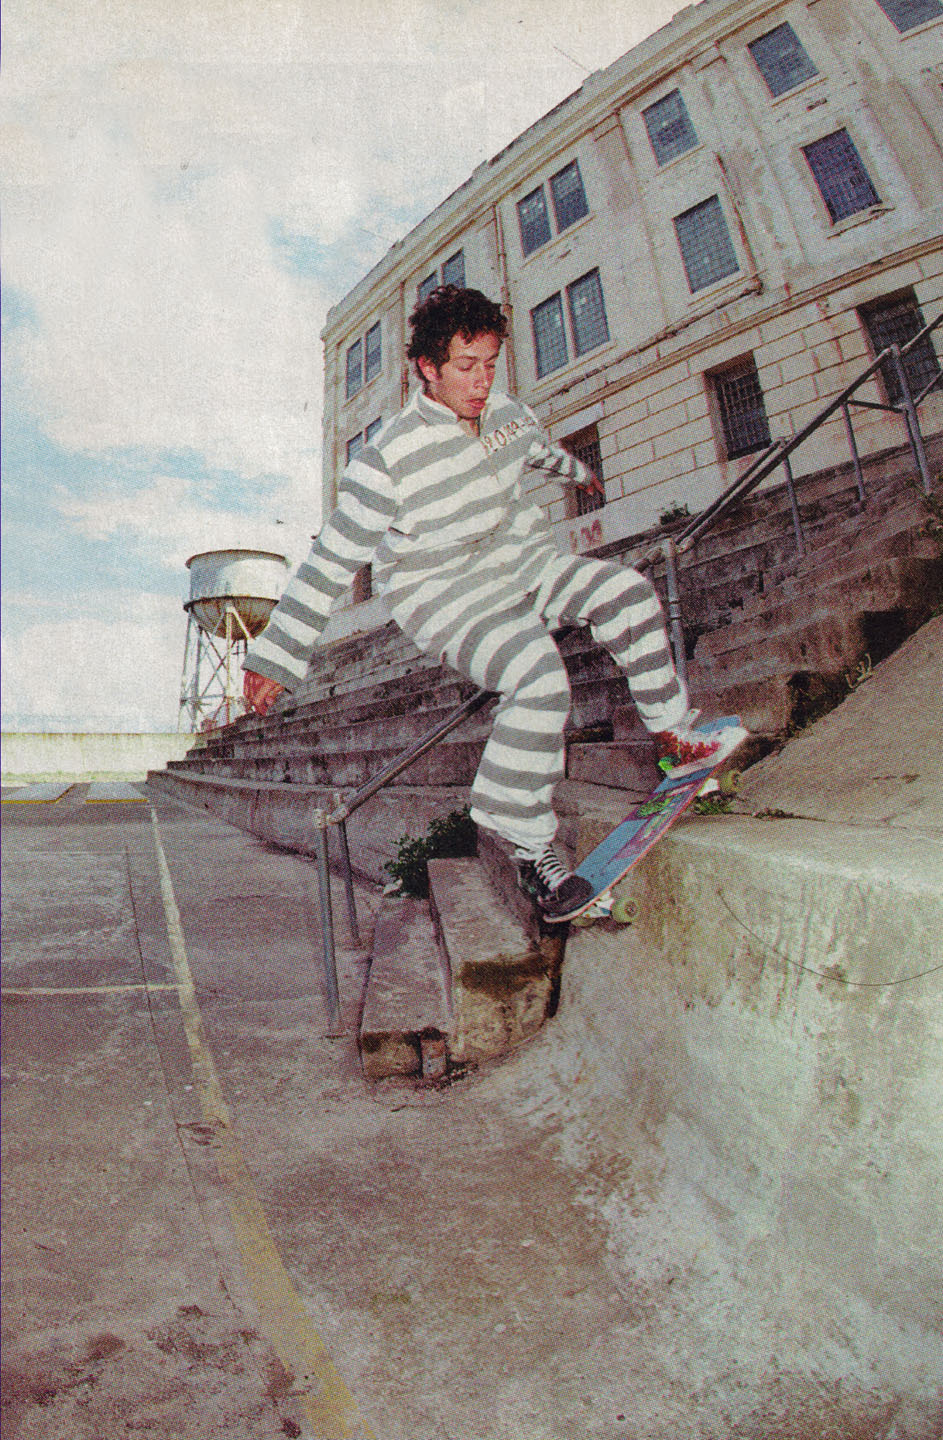 edwardlikestoskateboard:  The Gonz is the only person to get away with skating Alcatraz.